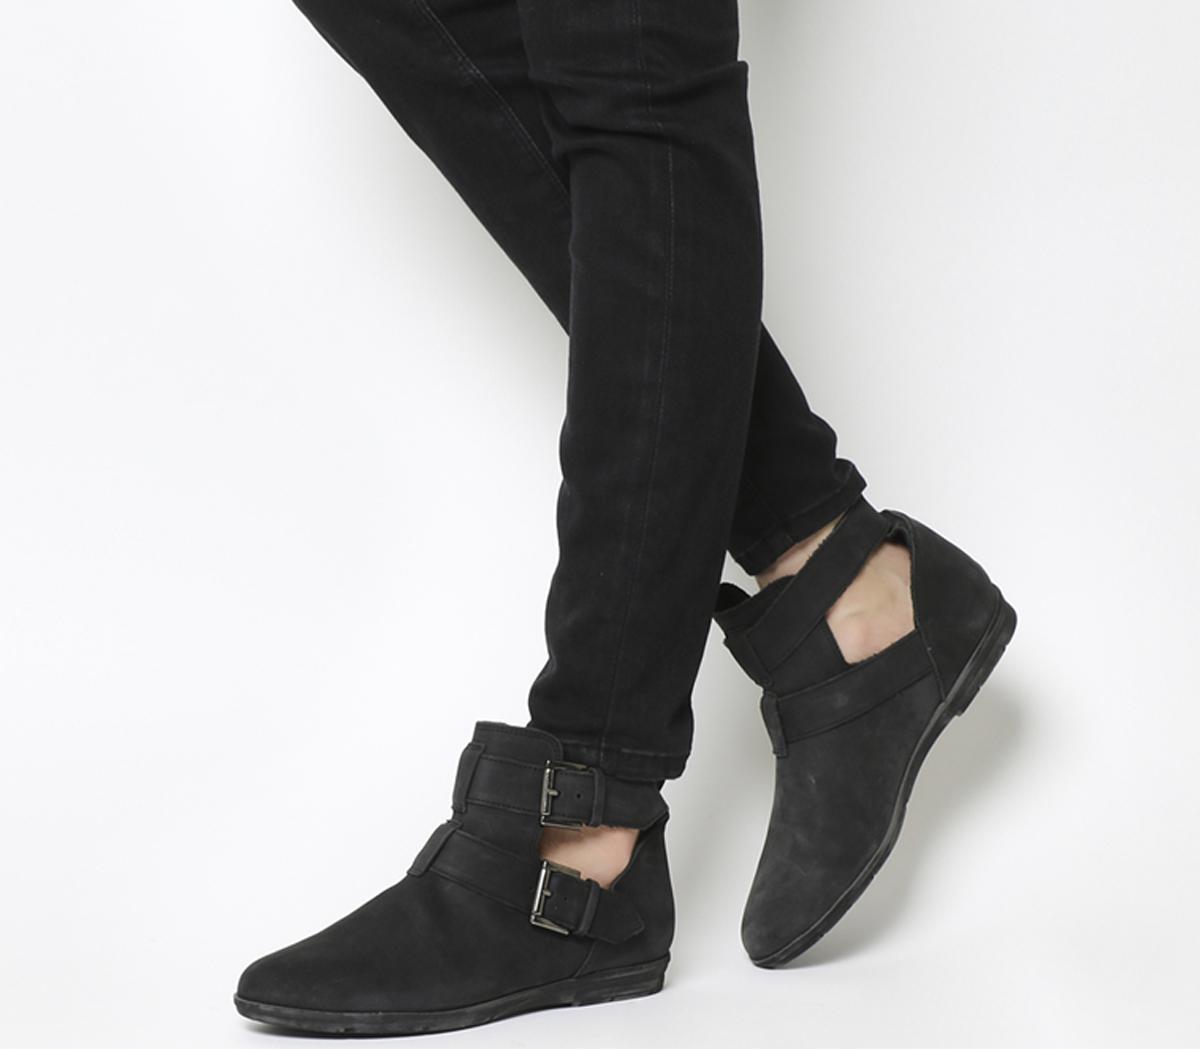 OFFICECountry Cut Out bootsBlack Nubuck